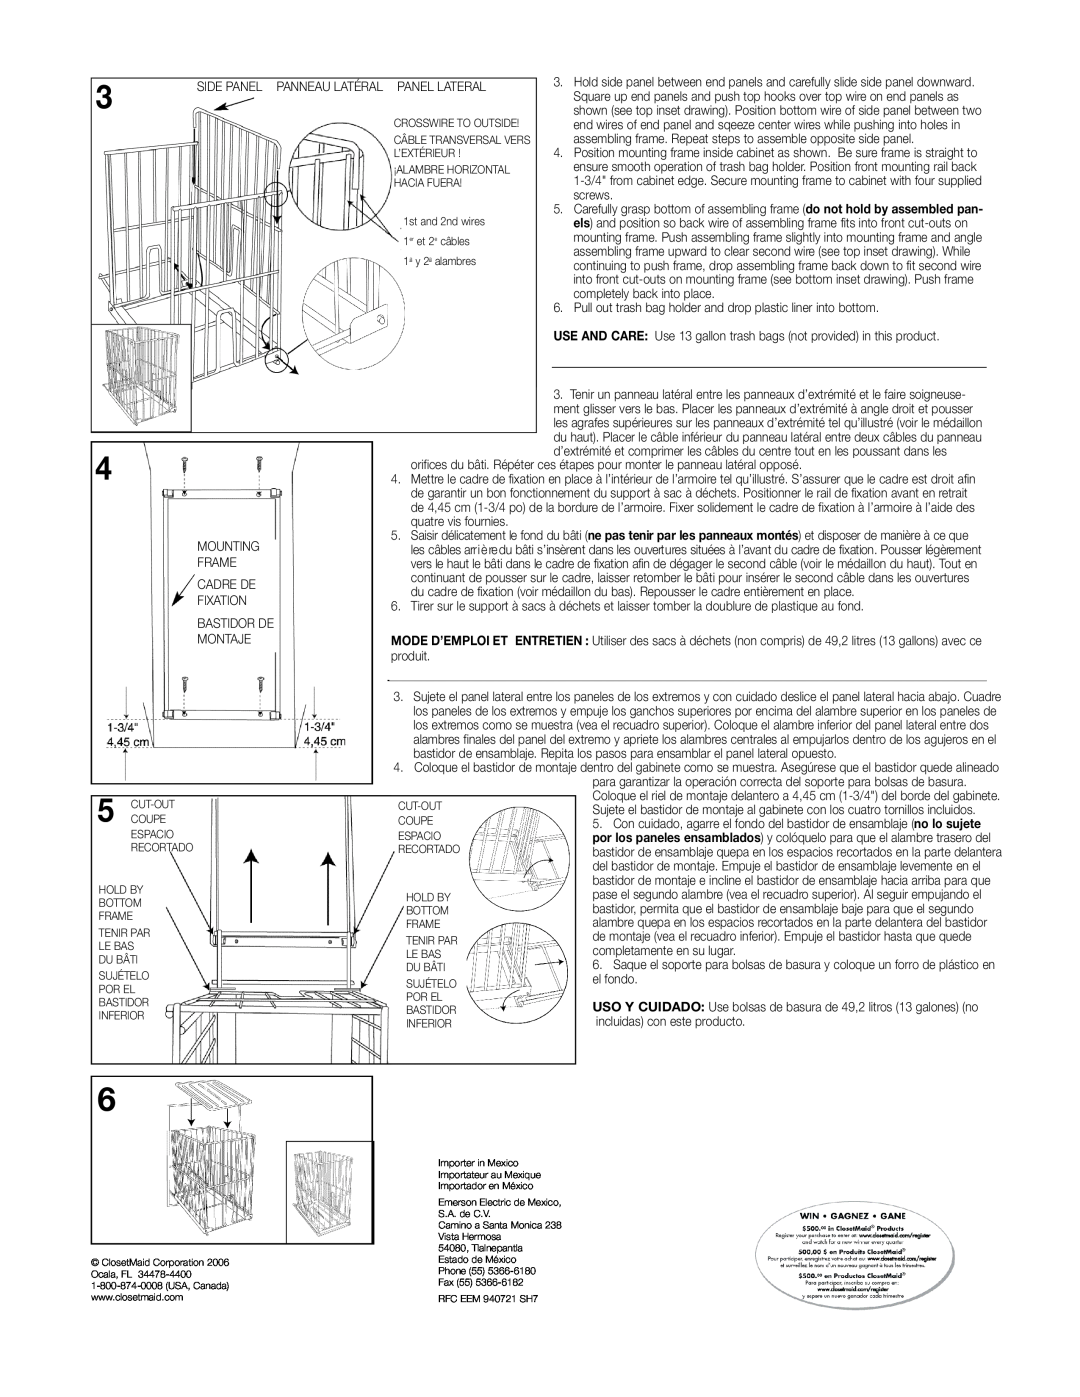 Closet Maid 3024 installation instructions Side Panel Panneau Latéral Panel Lateral 